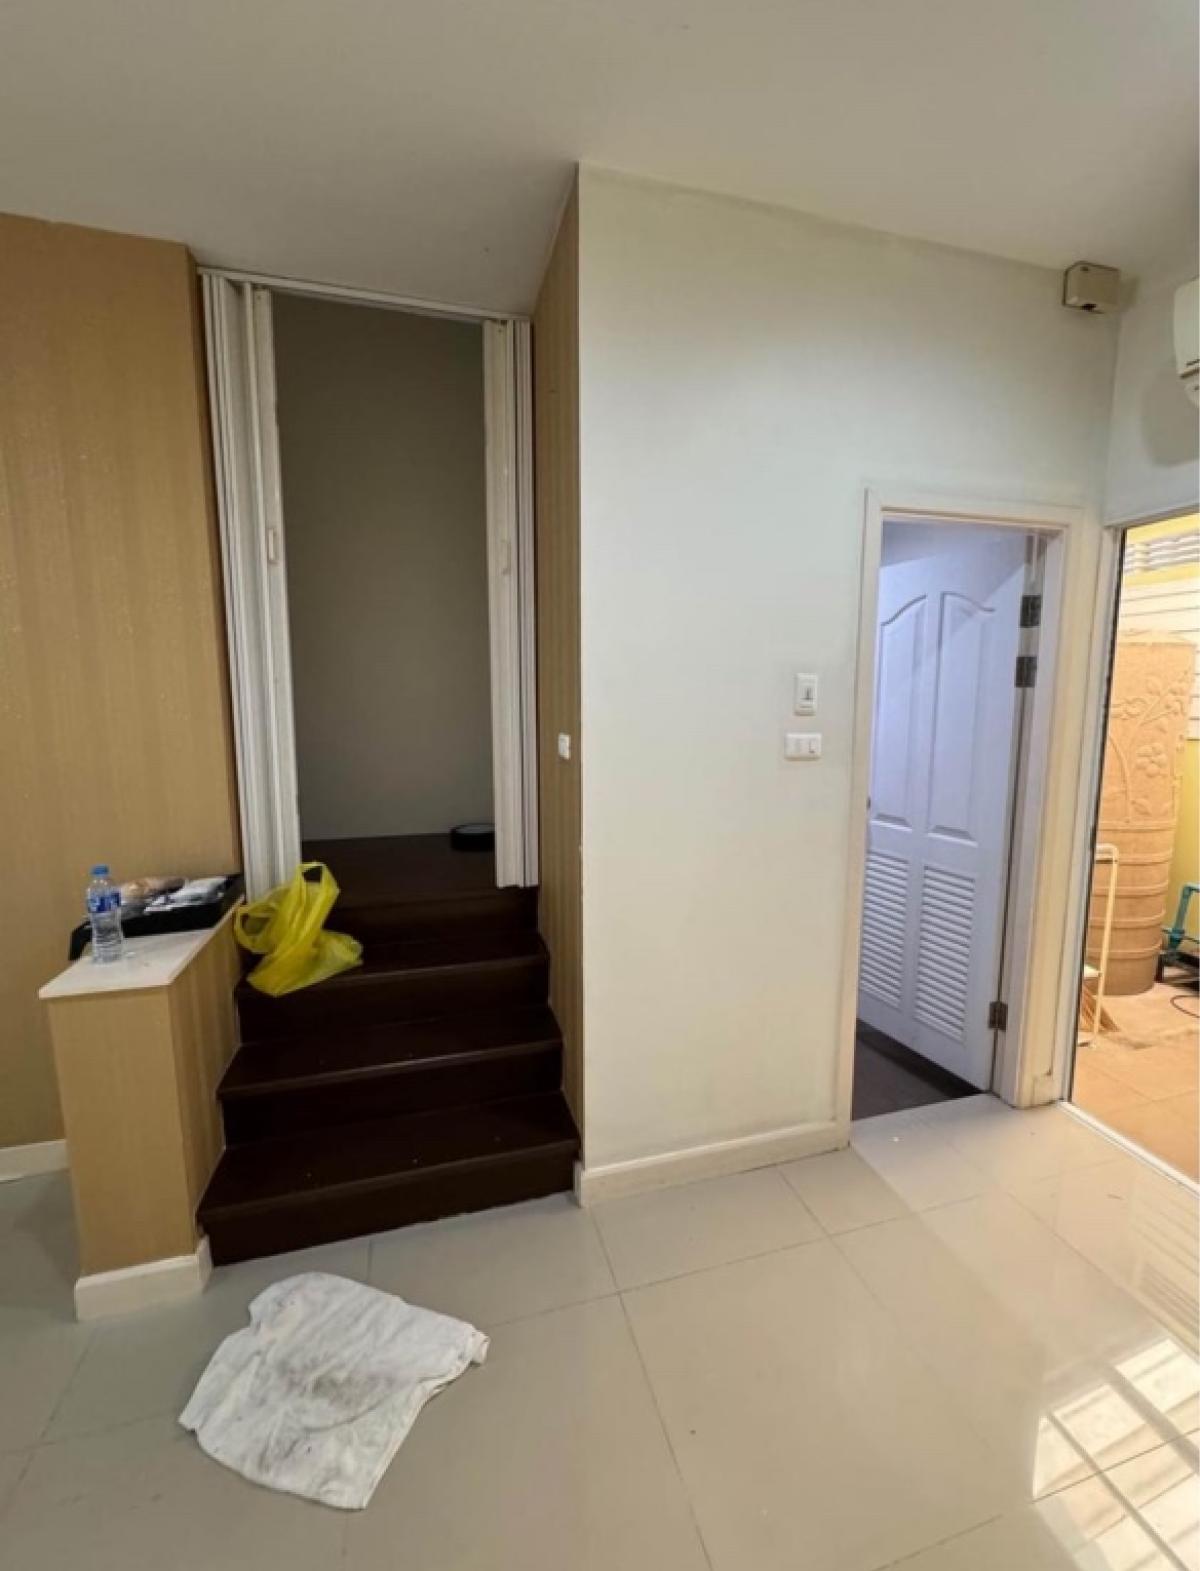 For RentTownhouseMin Buri, Romklao : 3-story townhome for rent, Ramkhamhaeng 144, partially decorated, ready to move in May 2024.